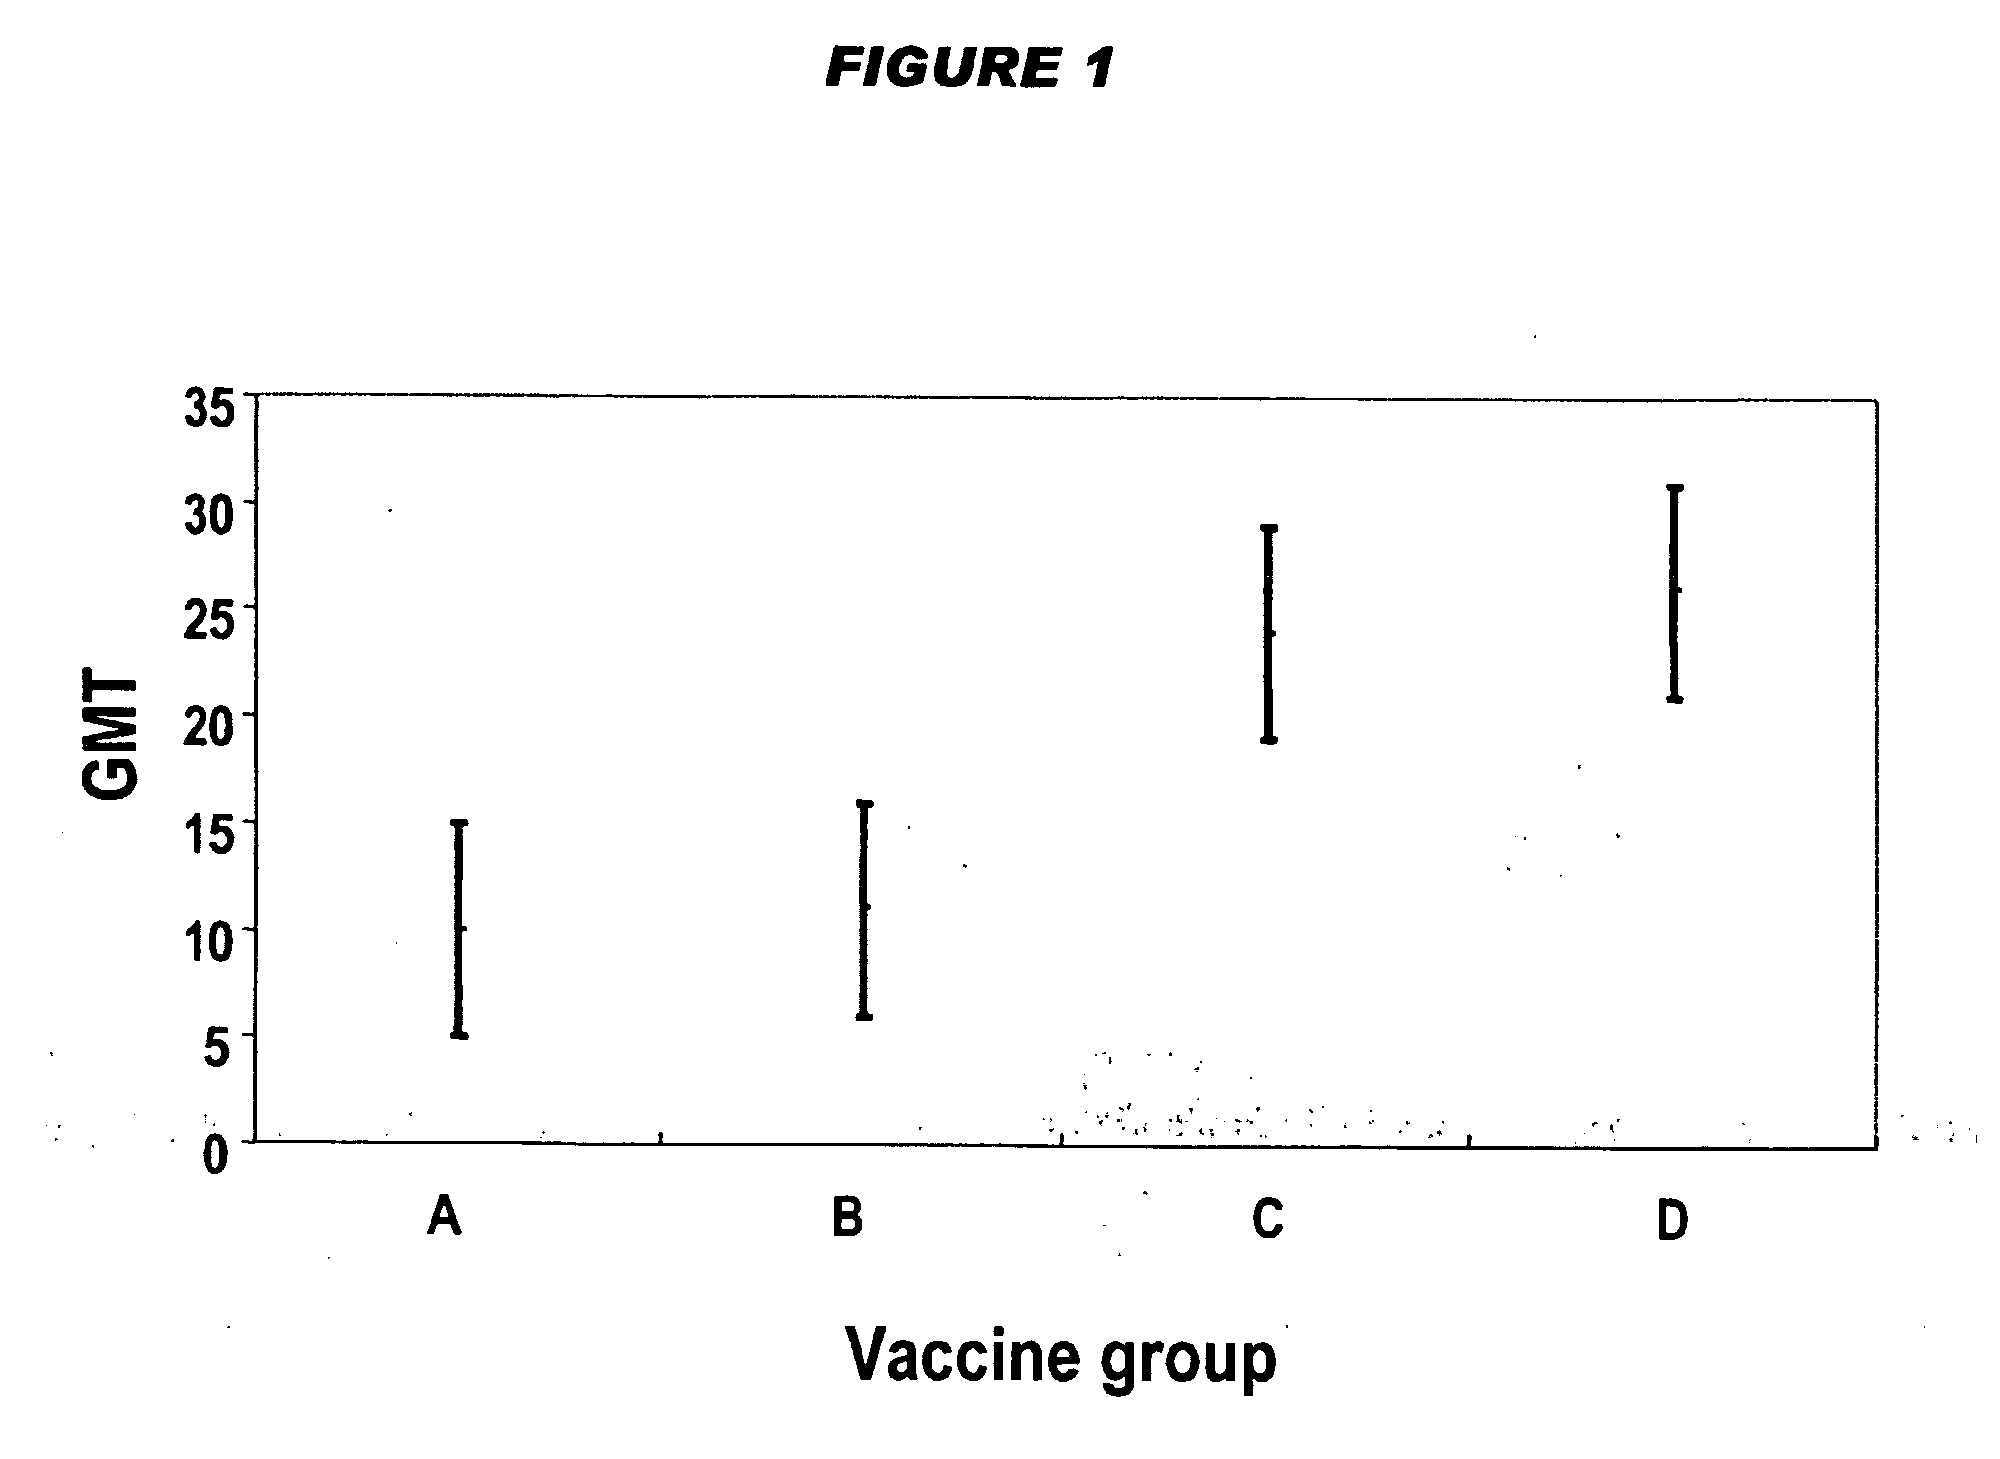 Combination vaccines with low dose of hib conjugate